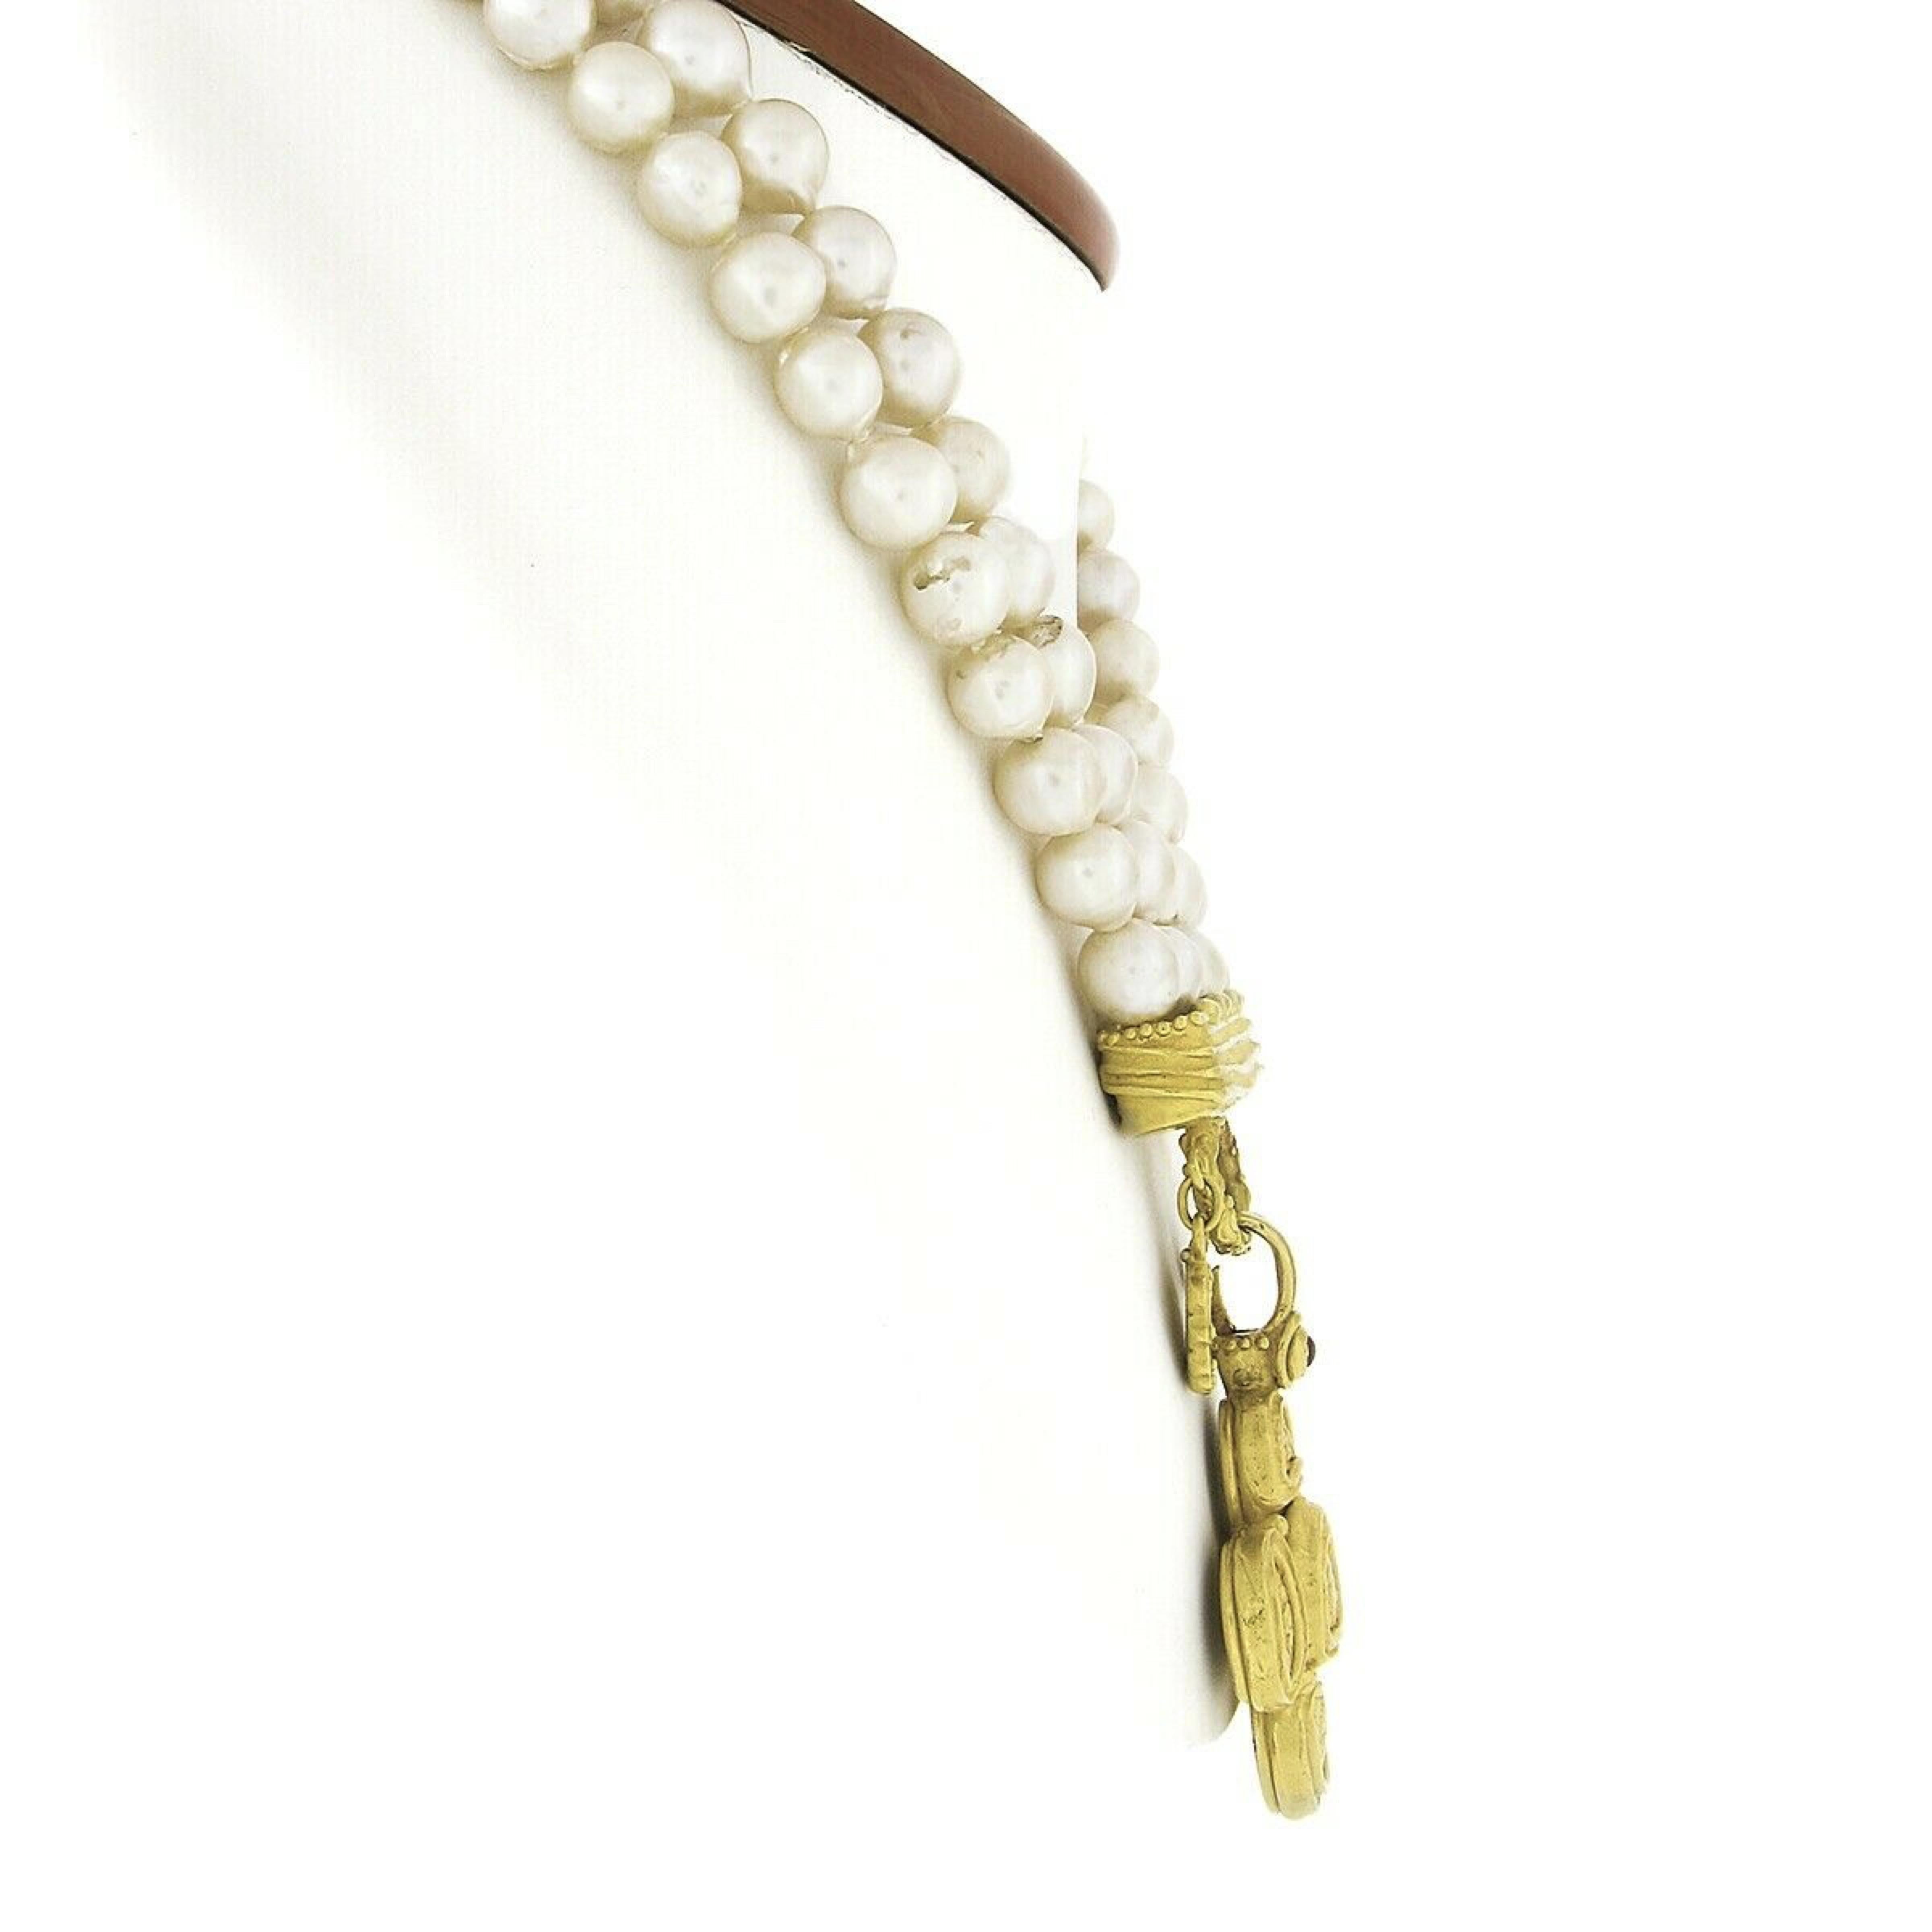 Here we have an absolutely gorgeous statement pendant necklace that is designed by Denise Roberge. This 30 inch dual strand necklace features 147 semi-baroque shape cultured pearls that are very well matched in size at approximately 8-8.5mm each.